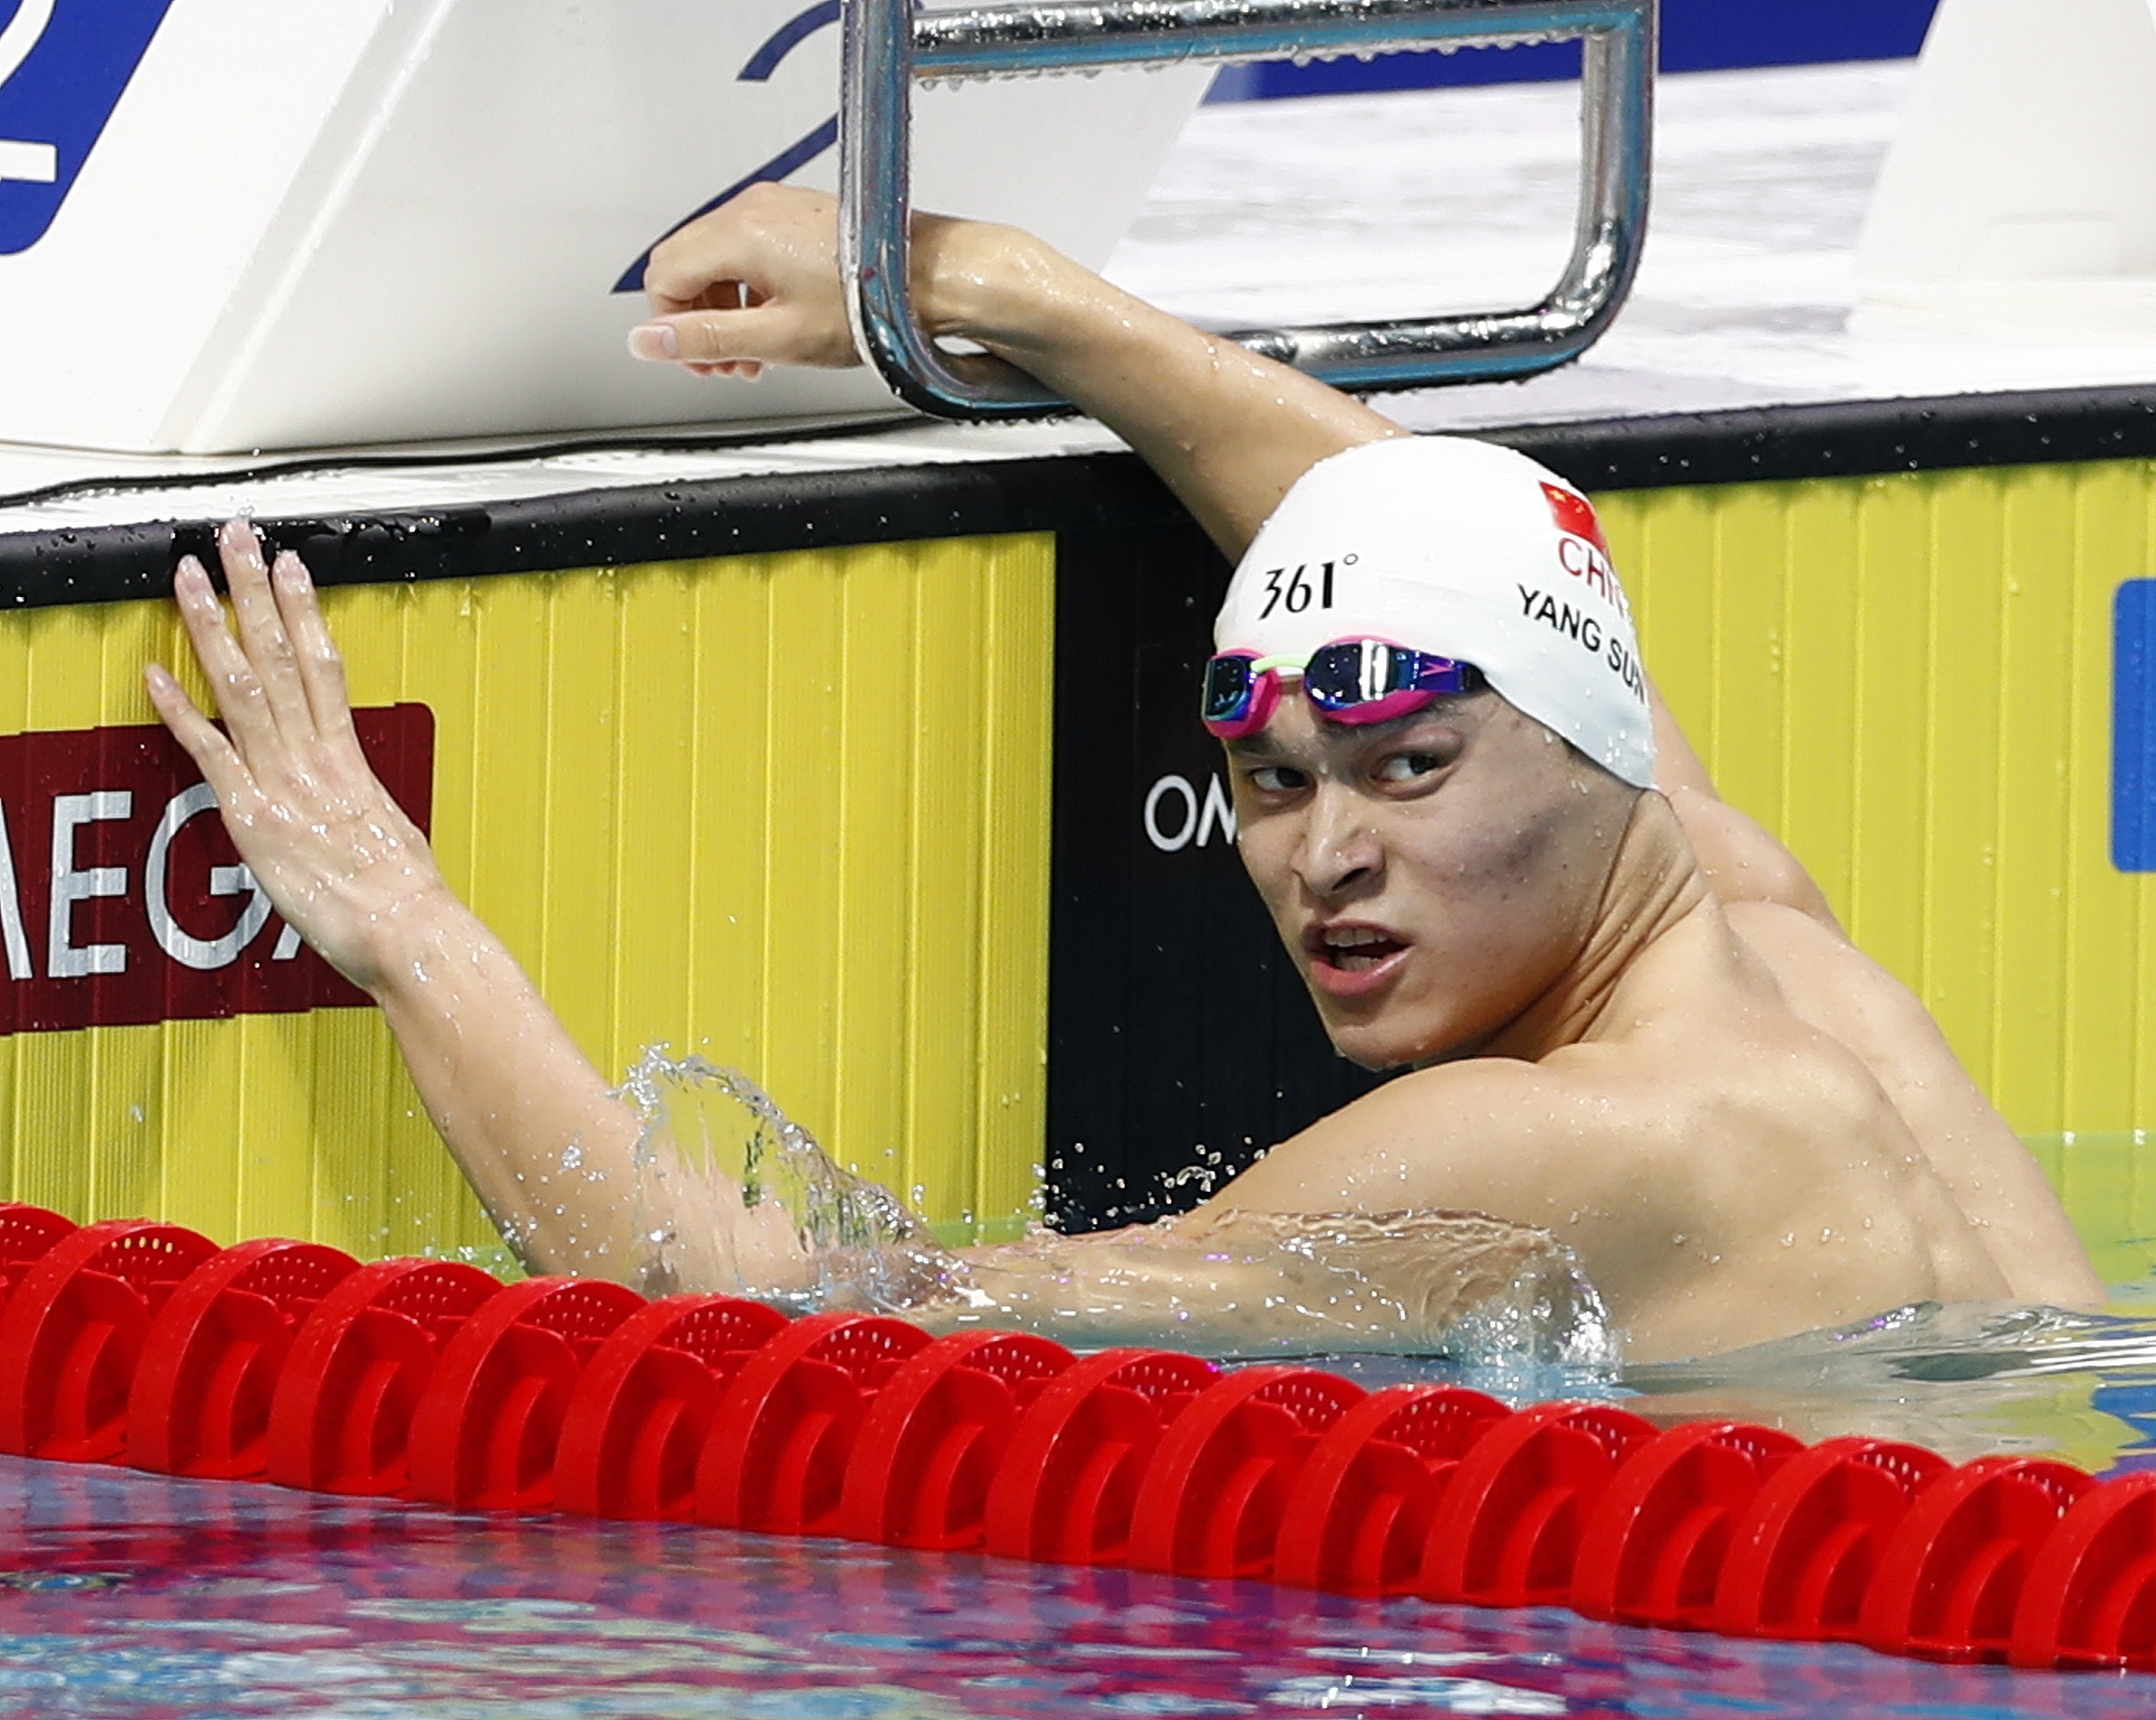 Sun Yang of China reacts after the men's 800m freestyle swimming final. Photos:Xinhua